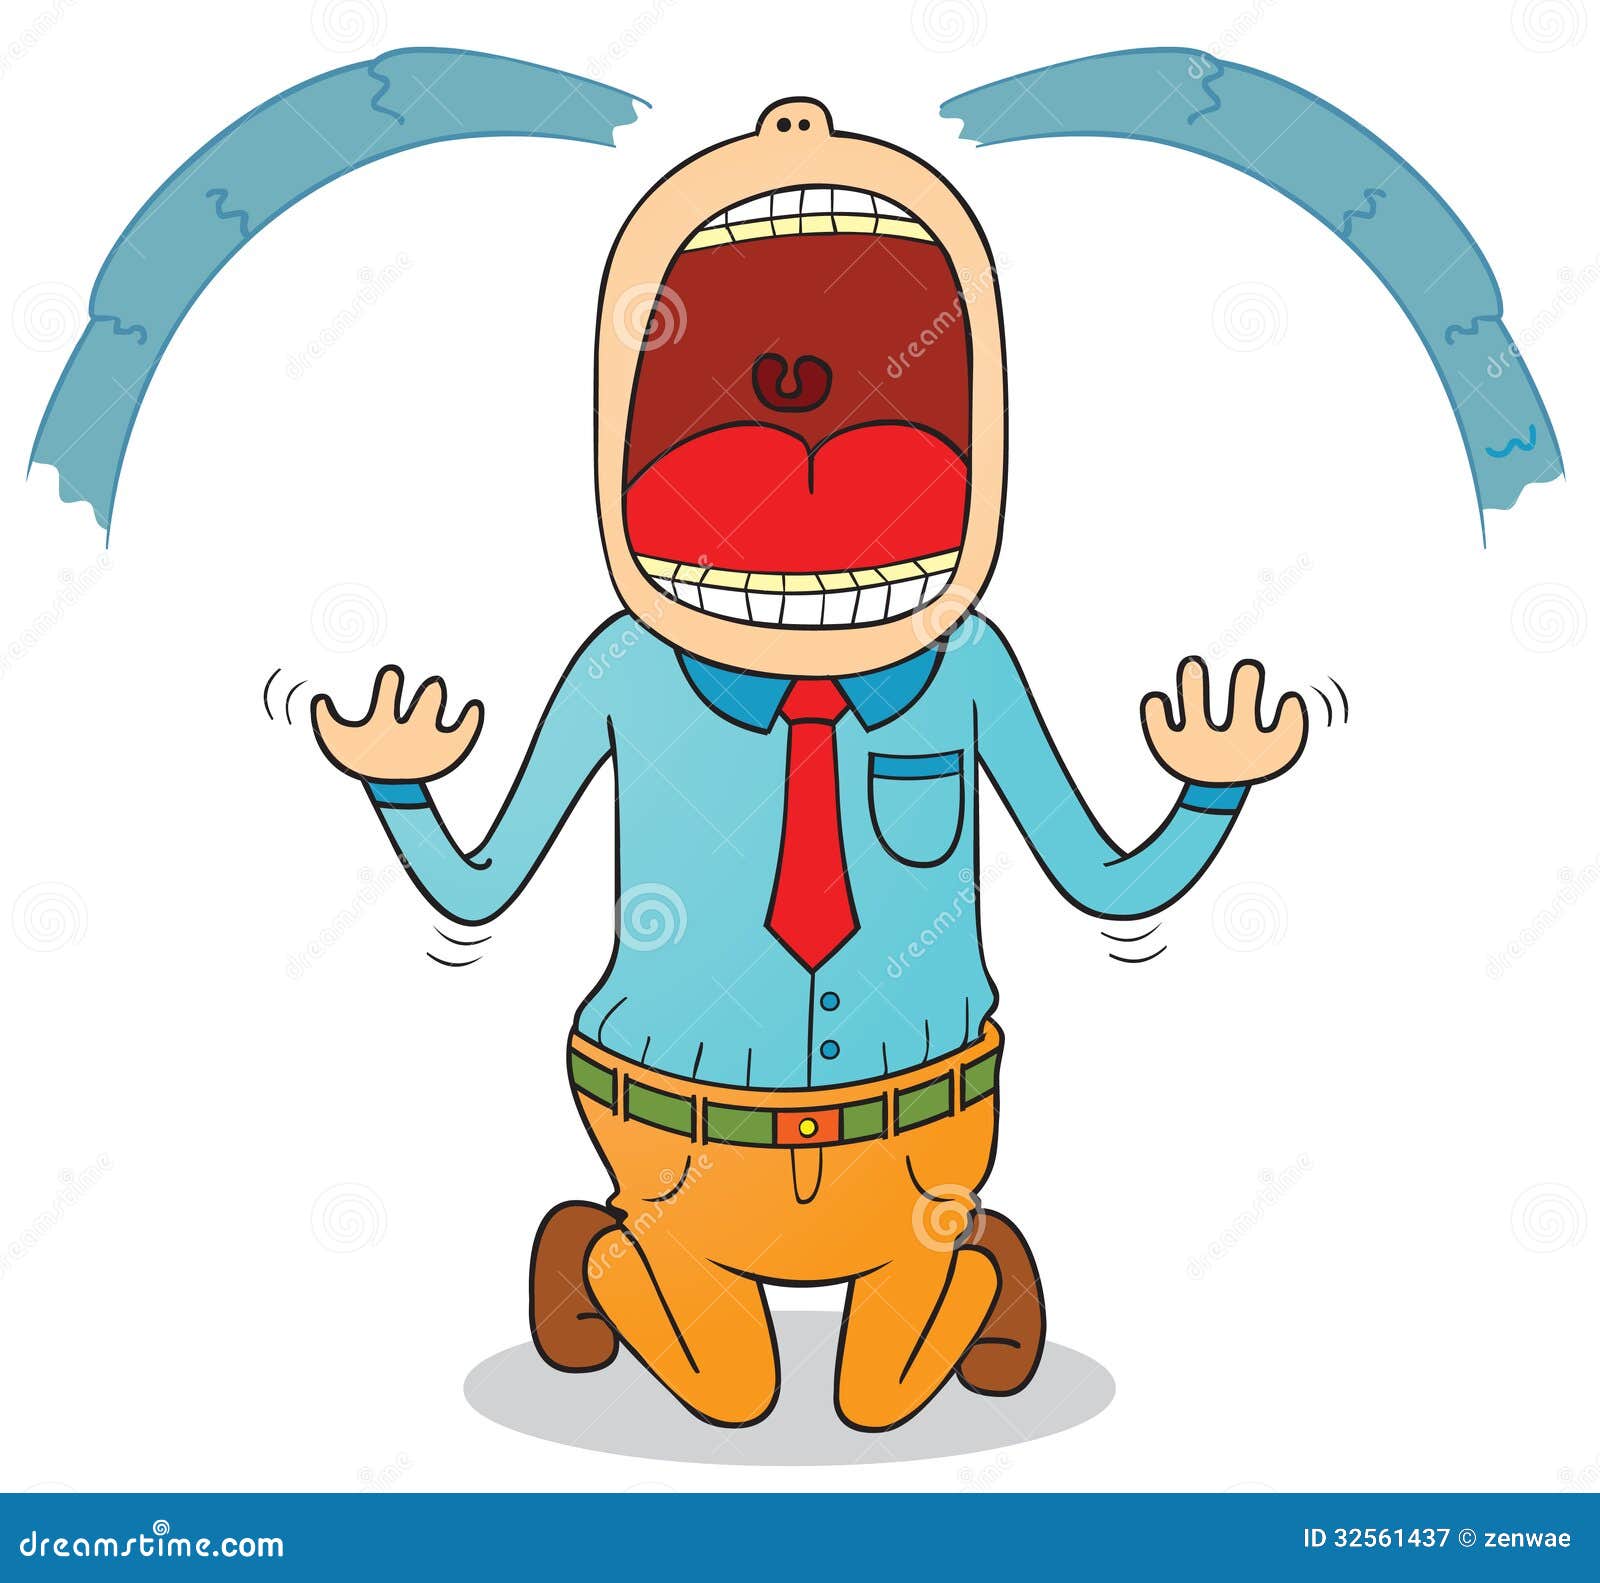 Crying seriously stock vector. Illustration of cartoon - 32561437